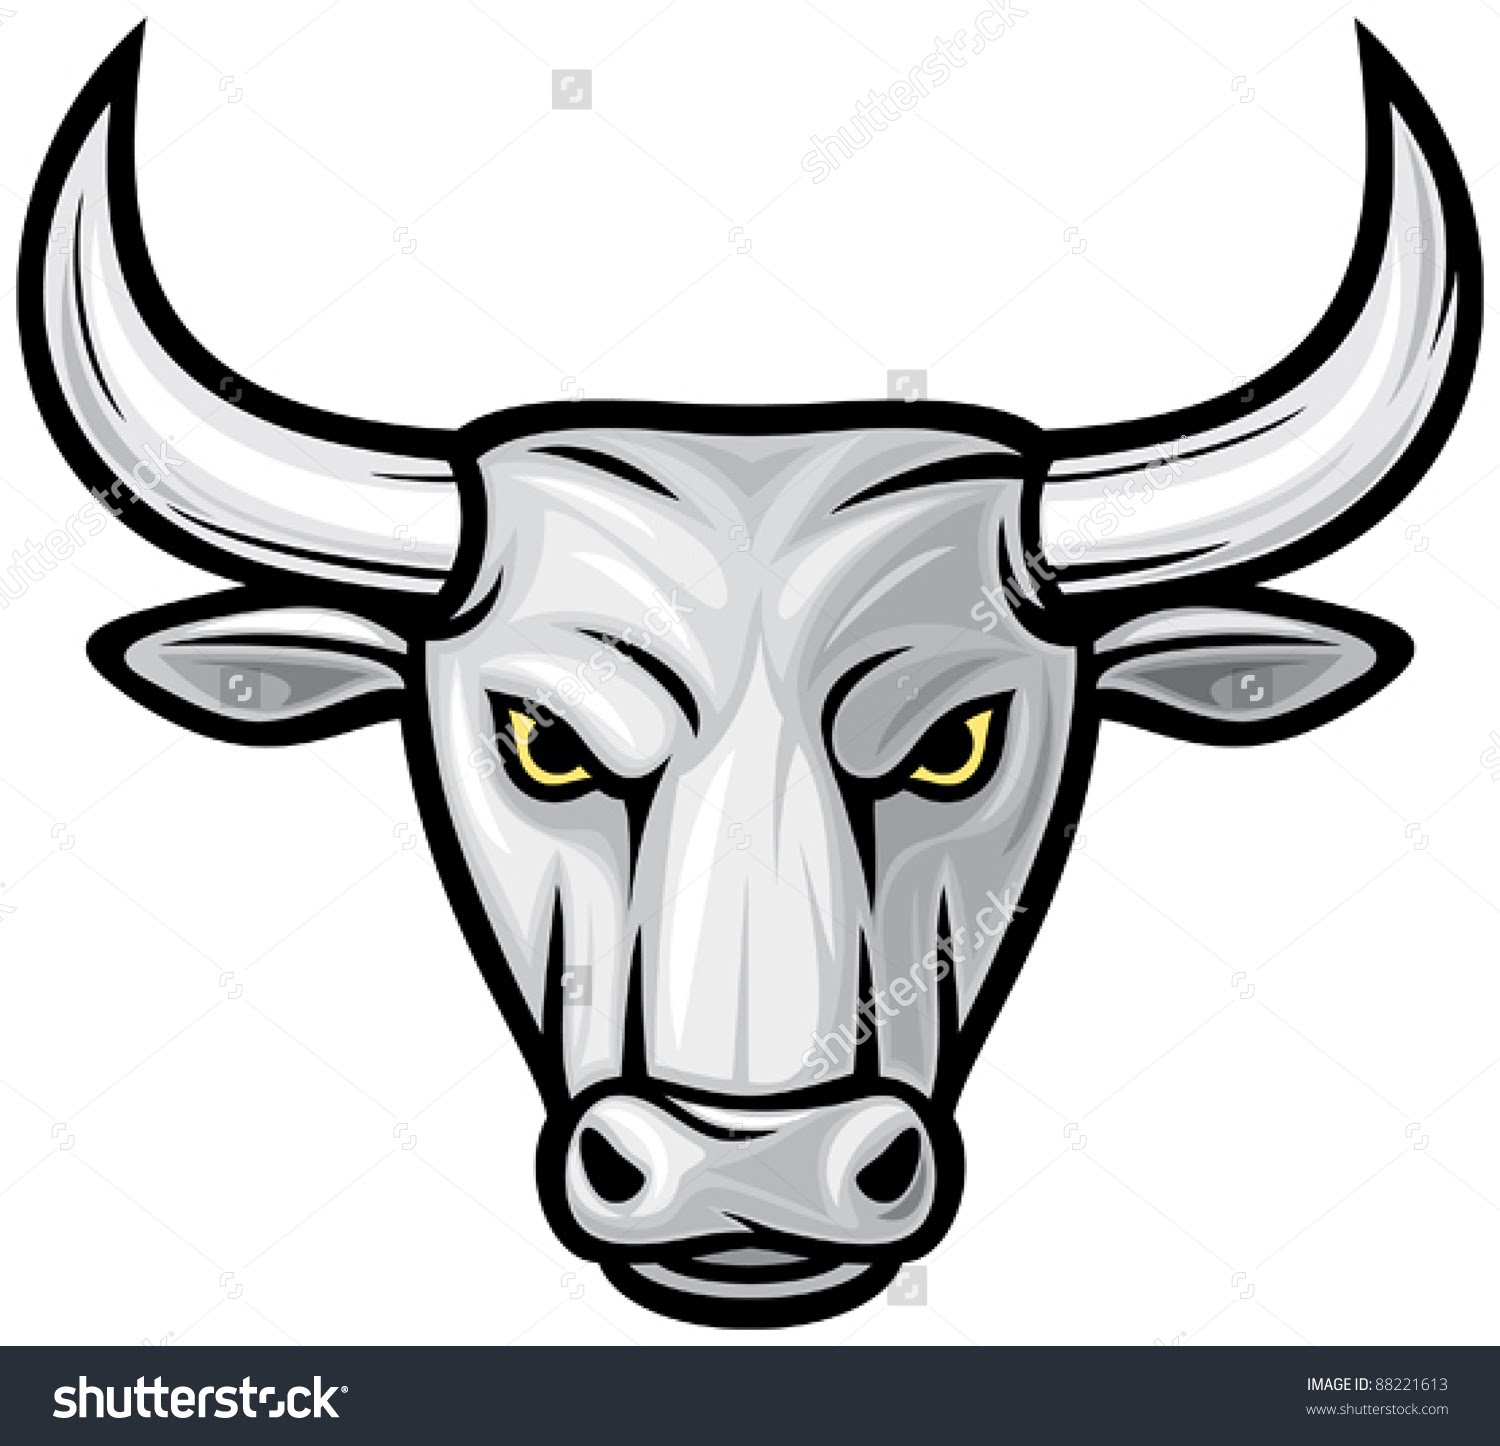 cattle clipart carabao